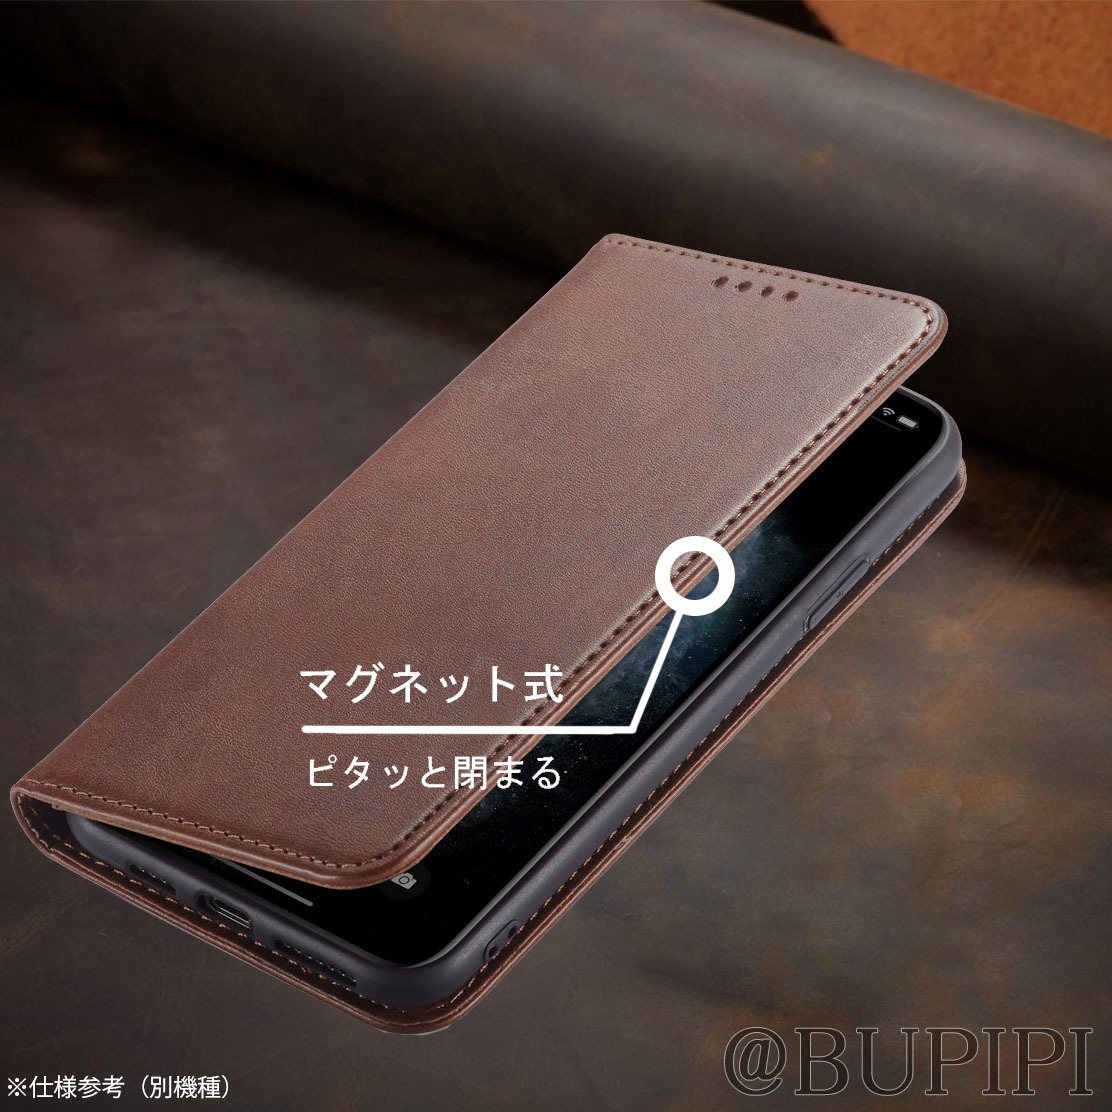  notebook type smartphone case high quality leather iphone X XS correspondence leather style Brown cover recommendation 